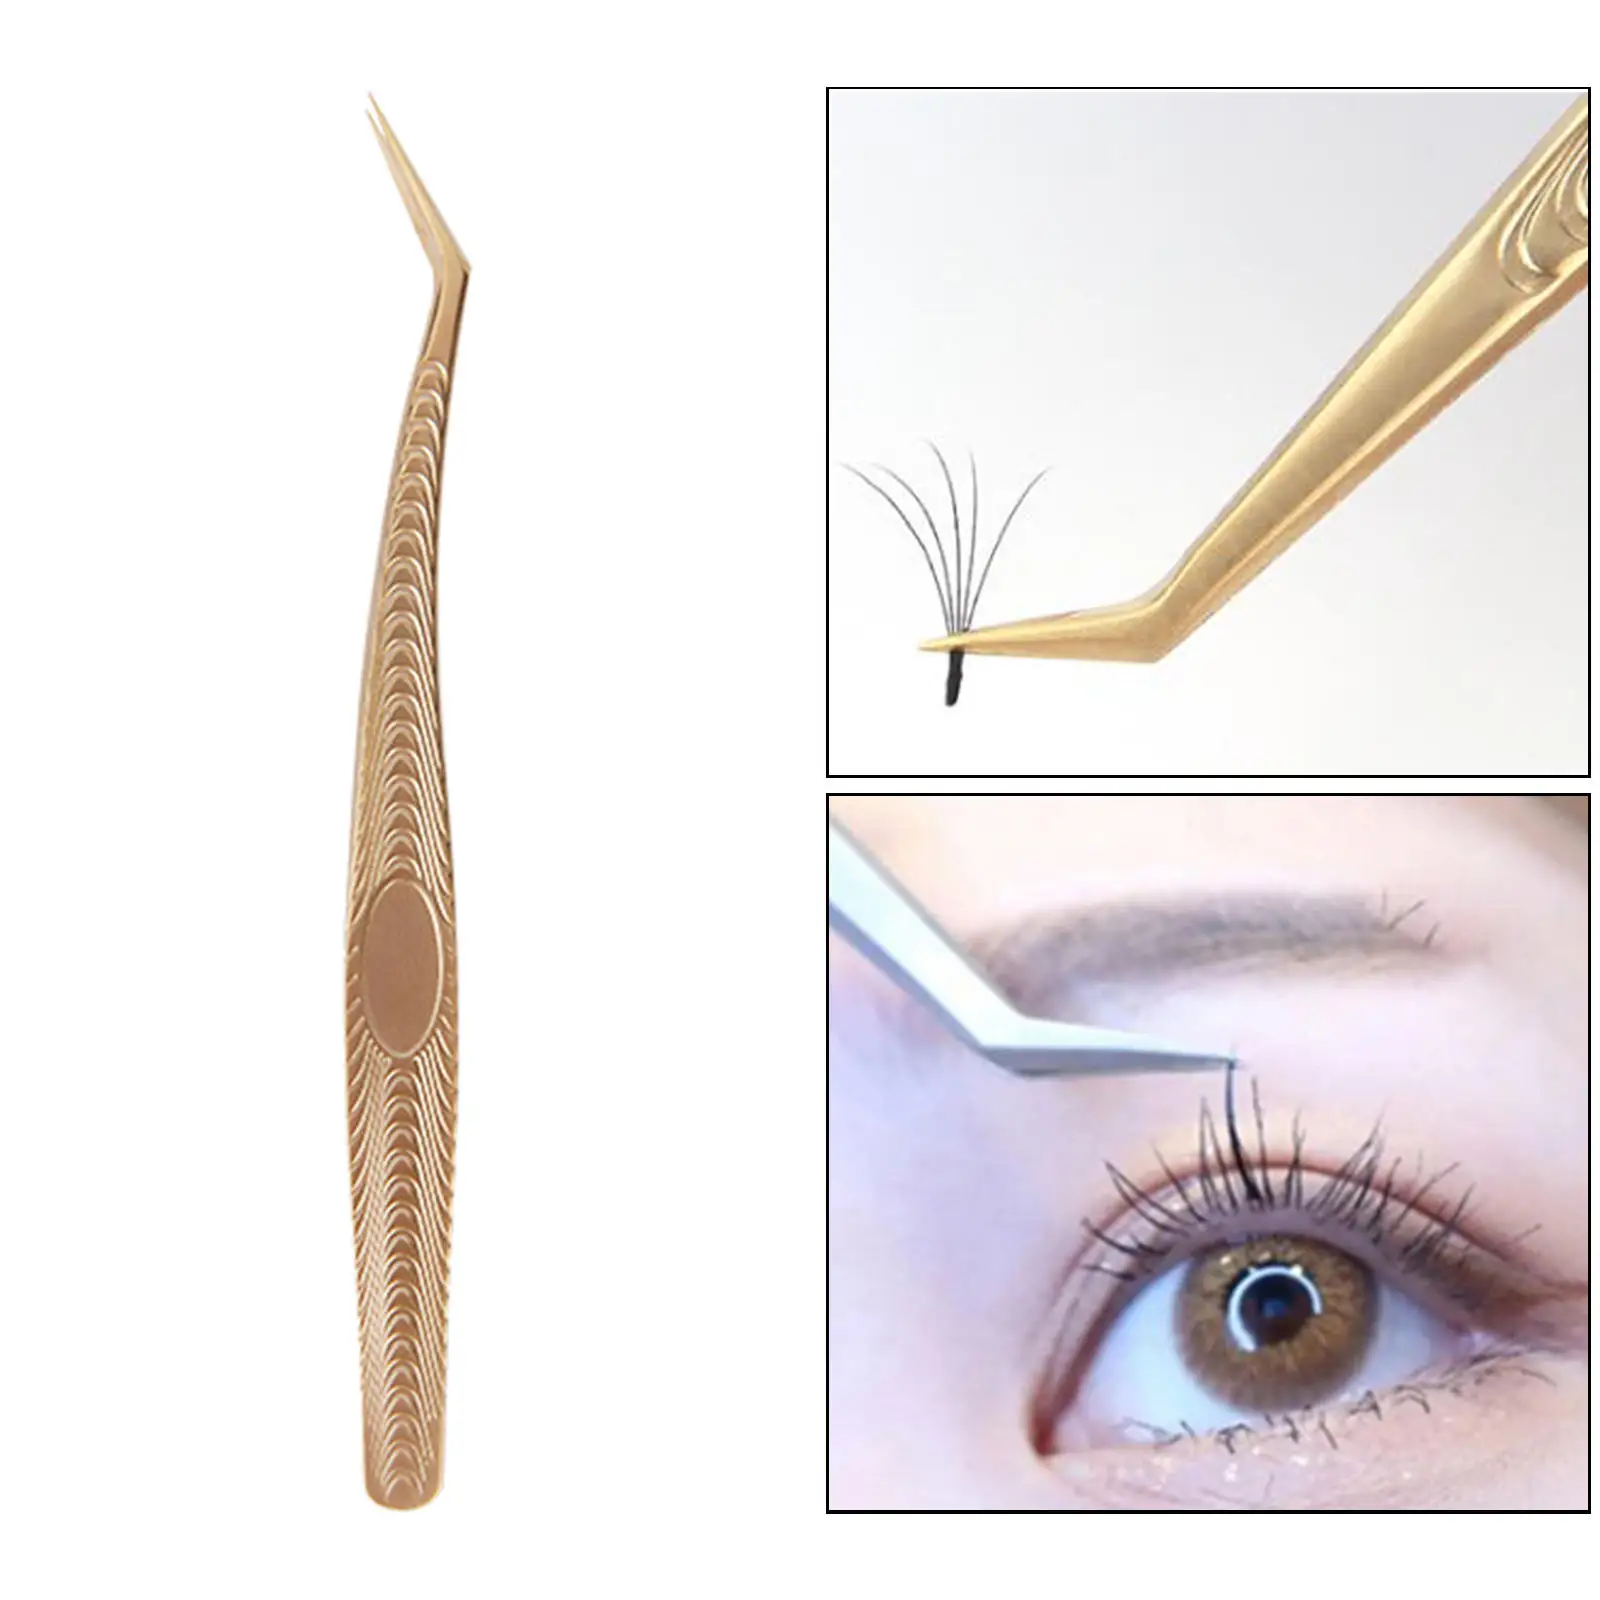 Stainless Steel Eyelash Tweezers, Straight and Curved Pointed Nippers, False Lash Application Tools, Lash Extension Supplies